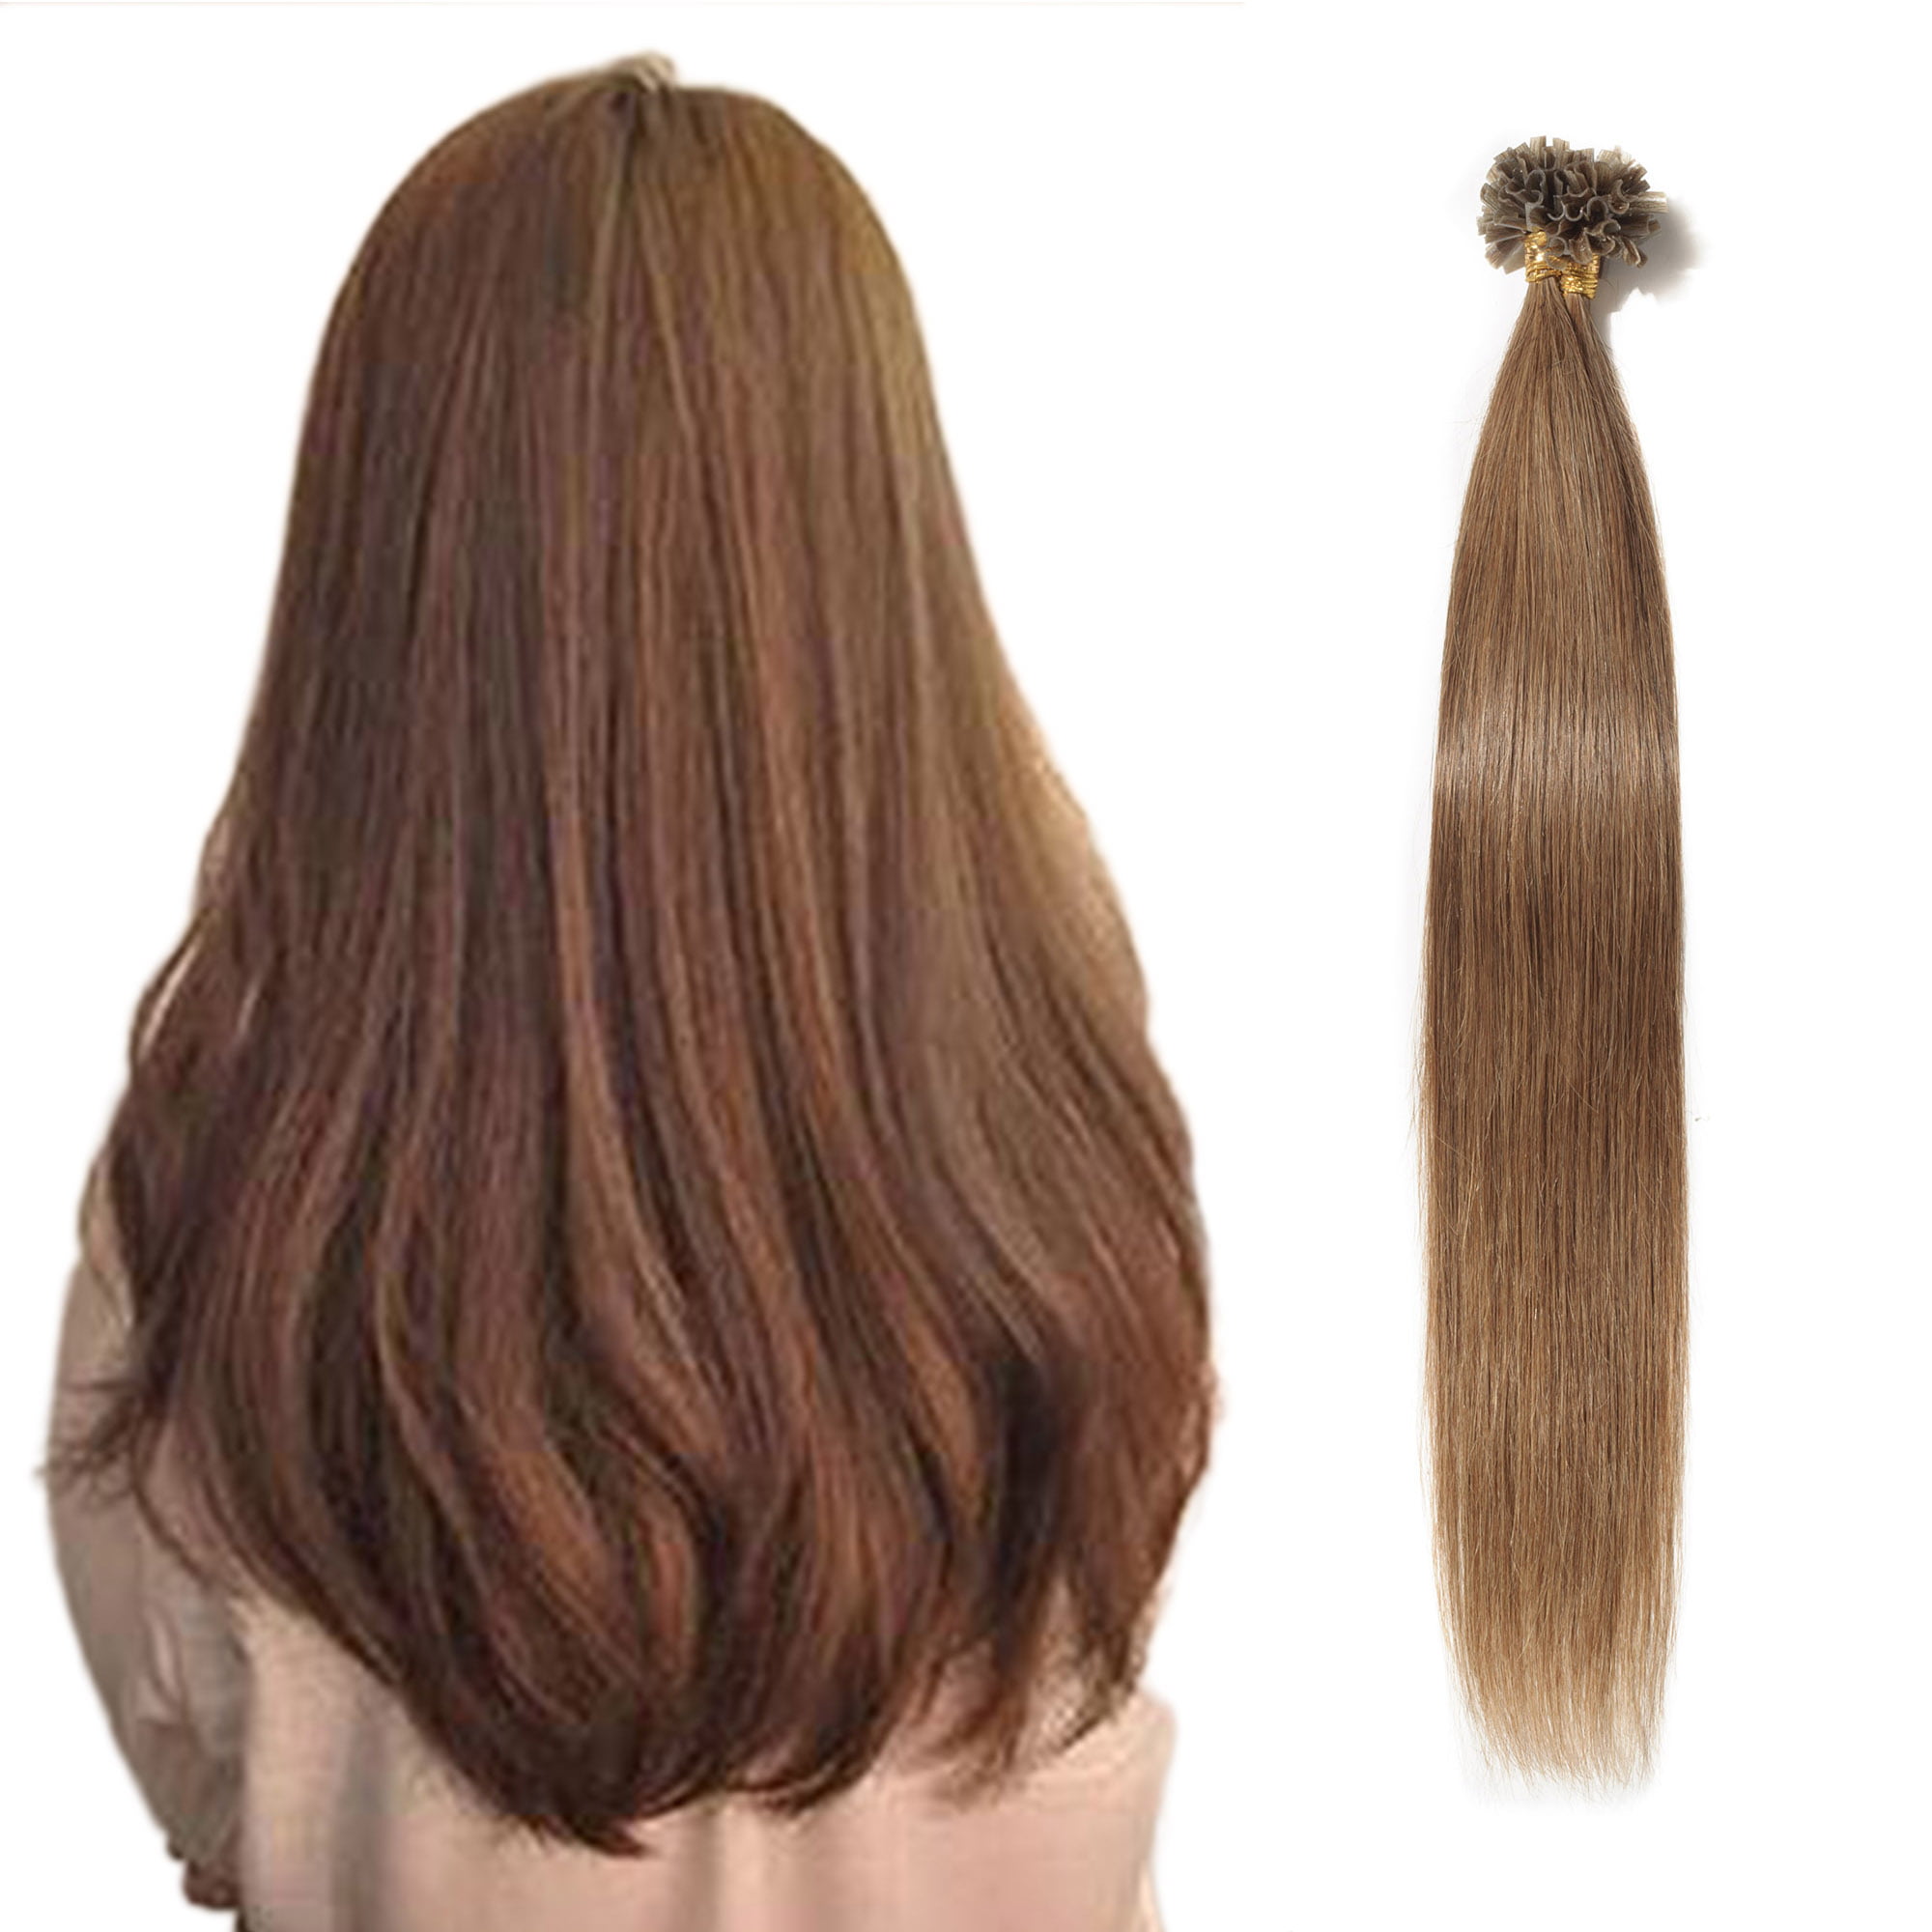 S-noilite 200 Strands Pre Bonded Human Hair Extensions U Tip Nail Tip  Keratin Remy Straight Light brown,18